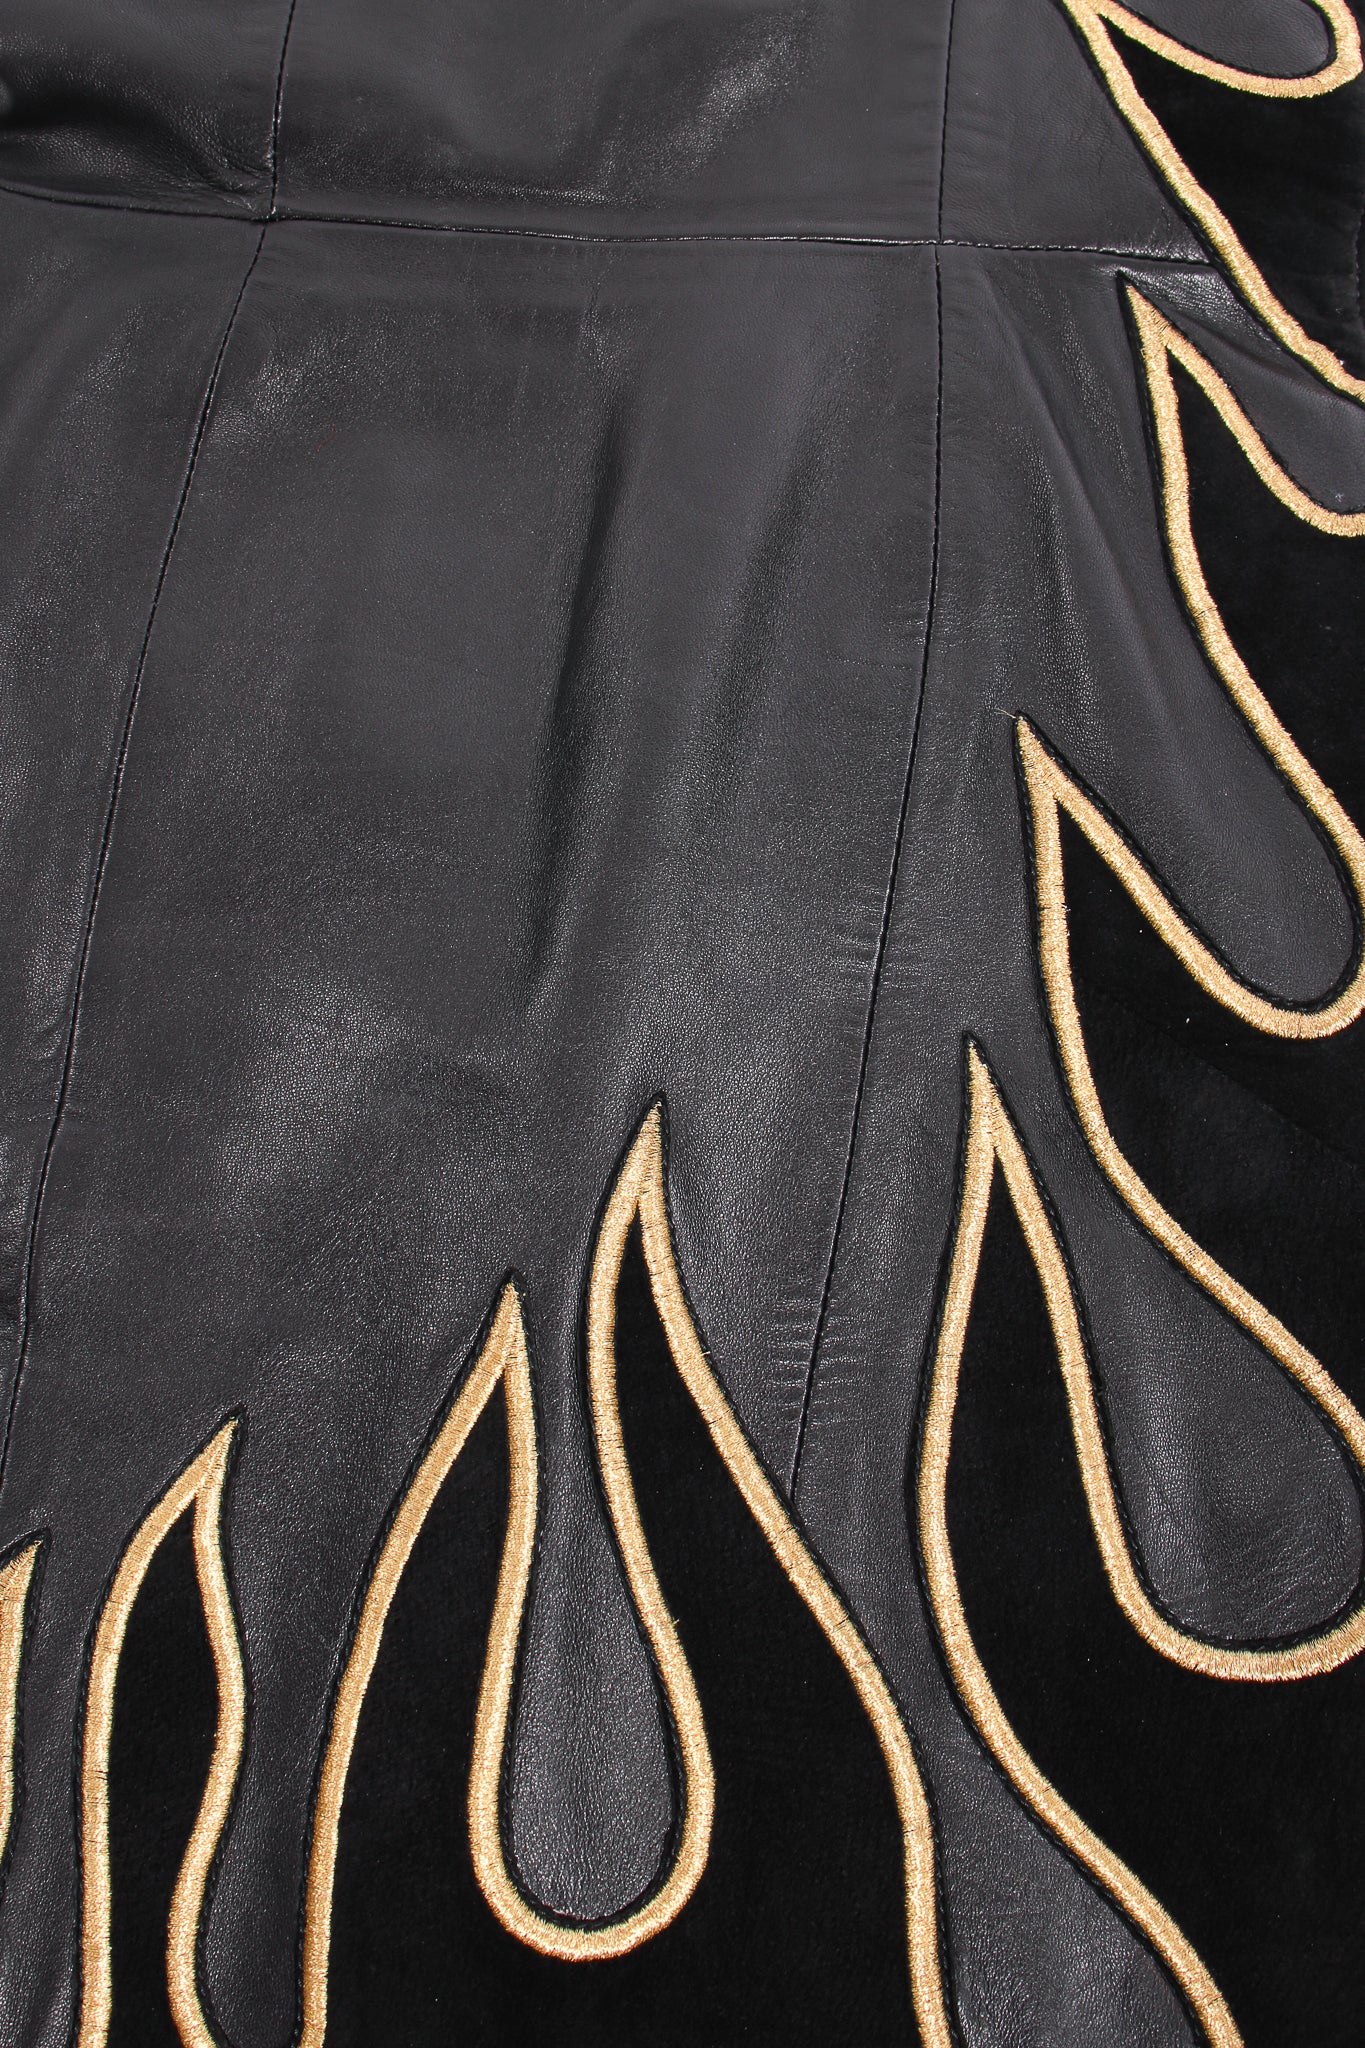 Vintage North Beach Leather One-Shoulder Leather Suede Flame Dress fabric detail at Recess LA